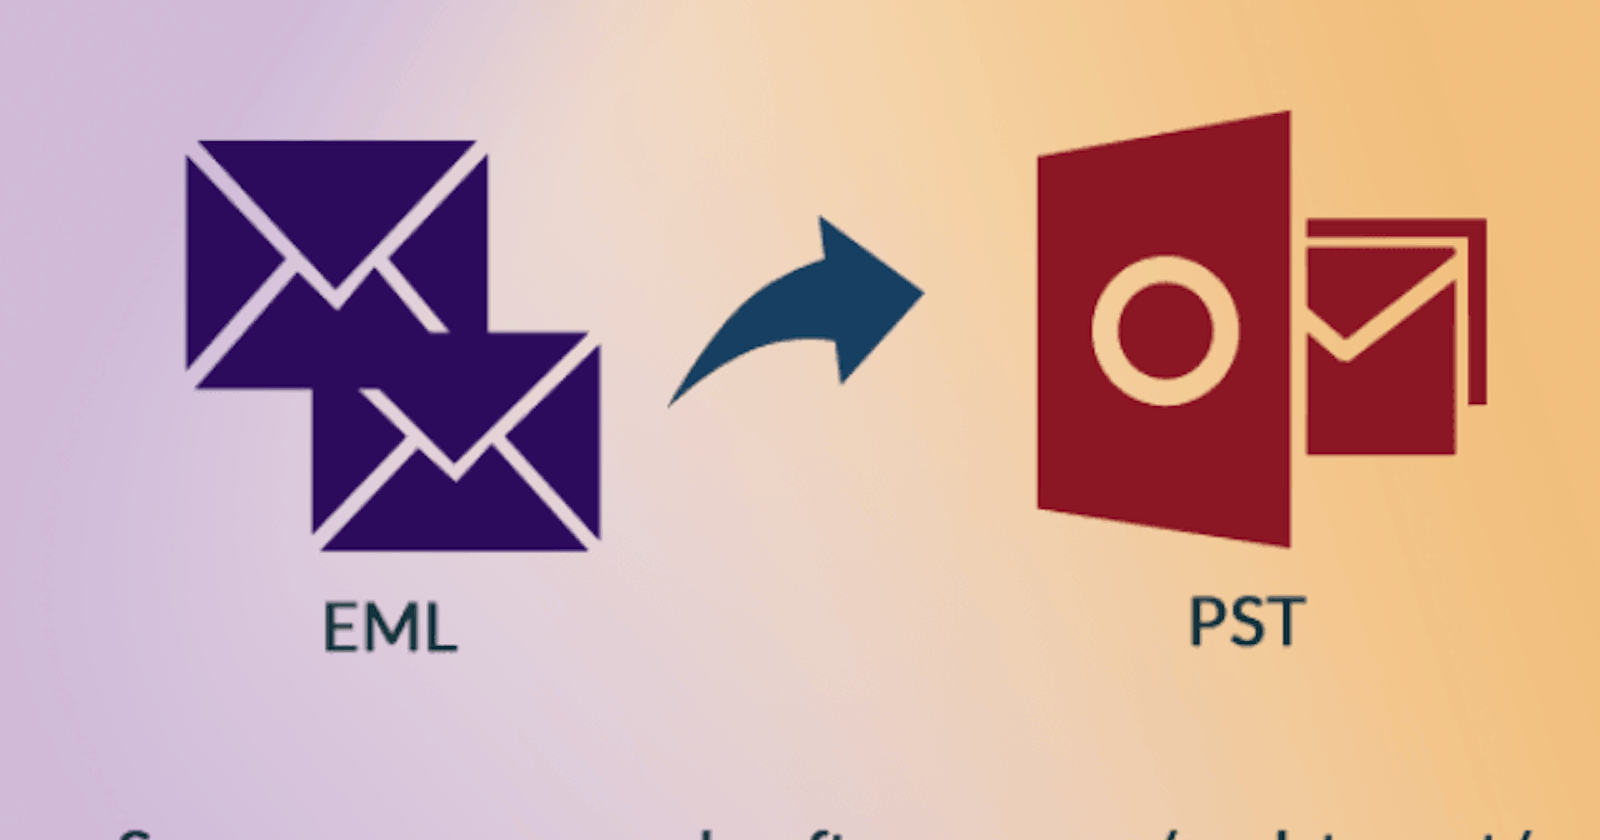 What is the EML format in Outlook?